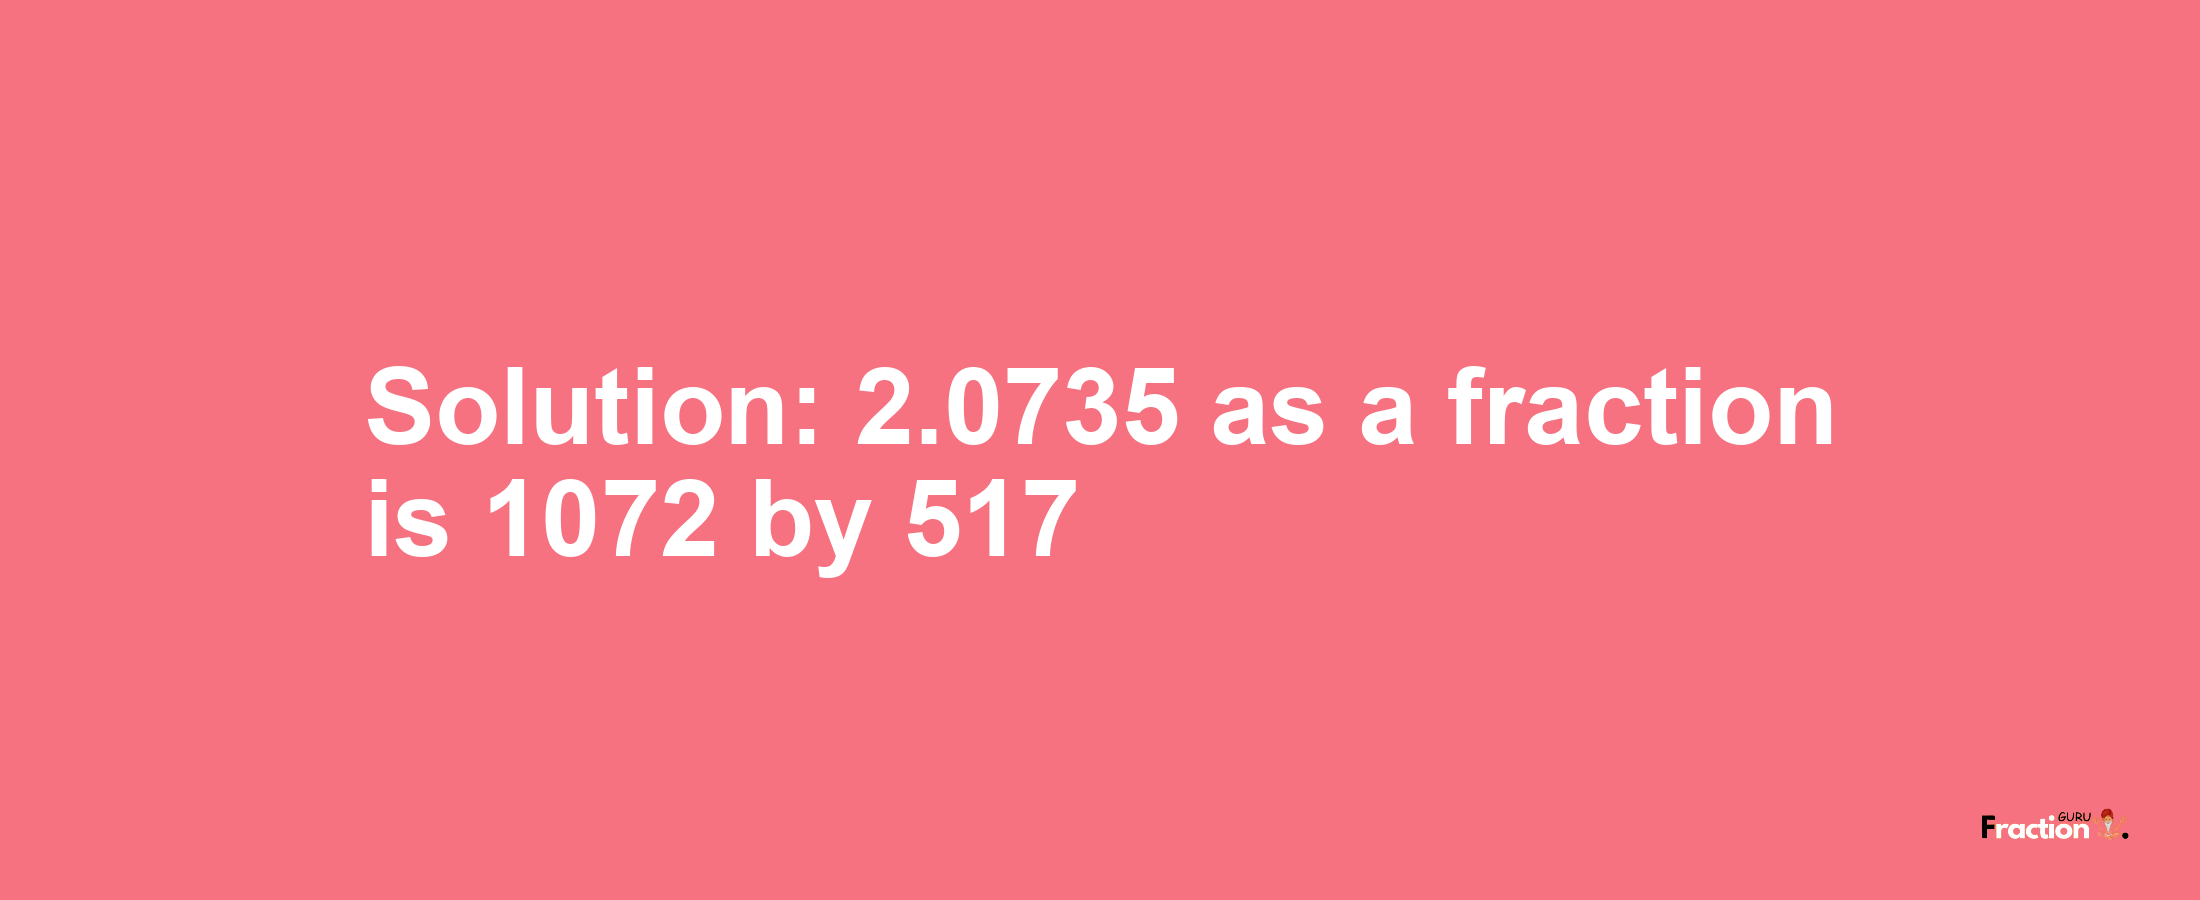 Solution:2.0735 as a fraction is 1072/517